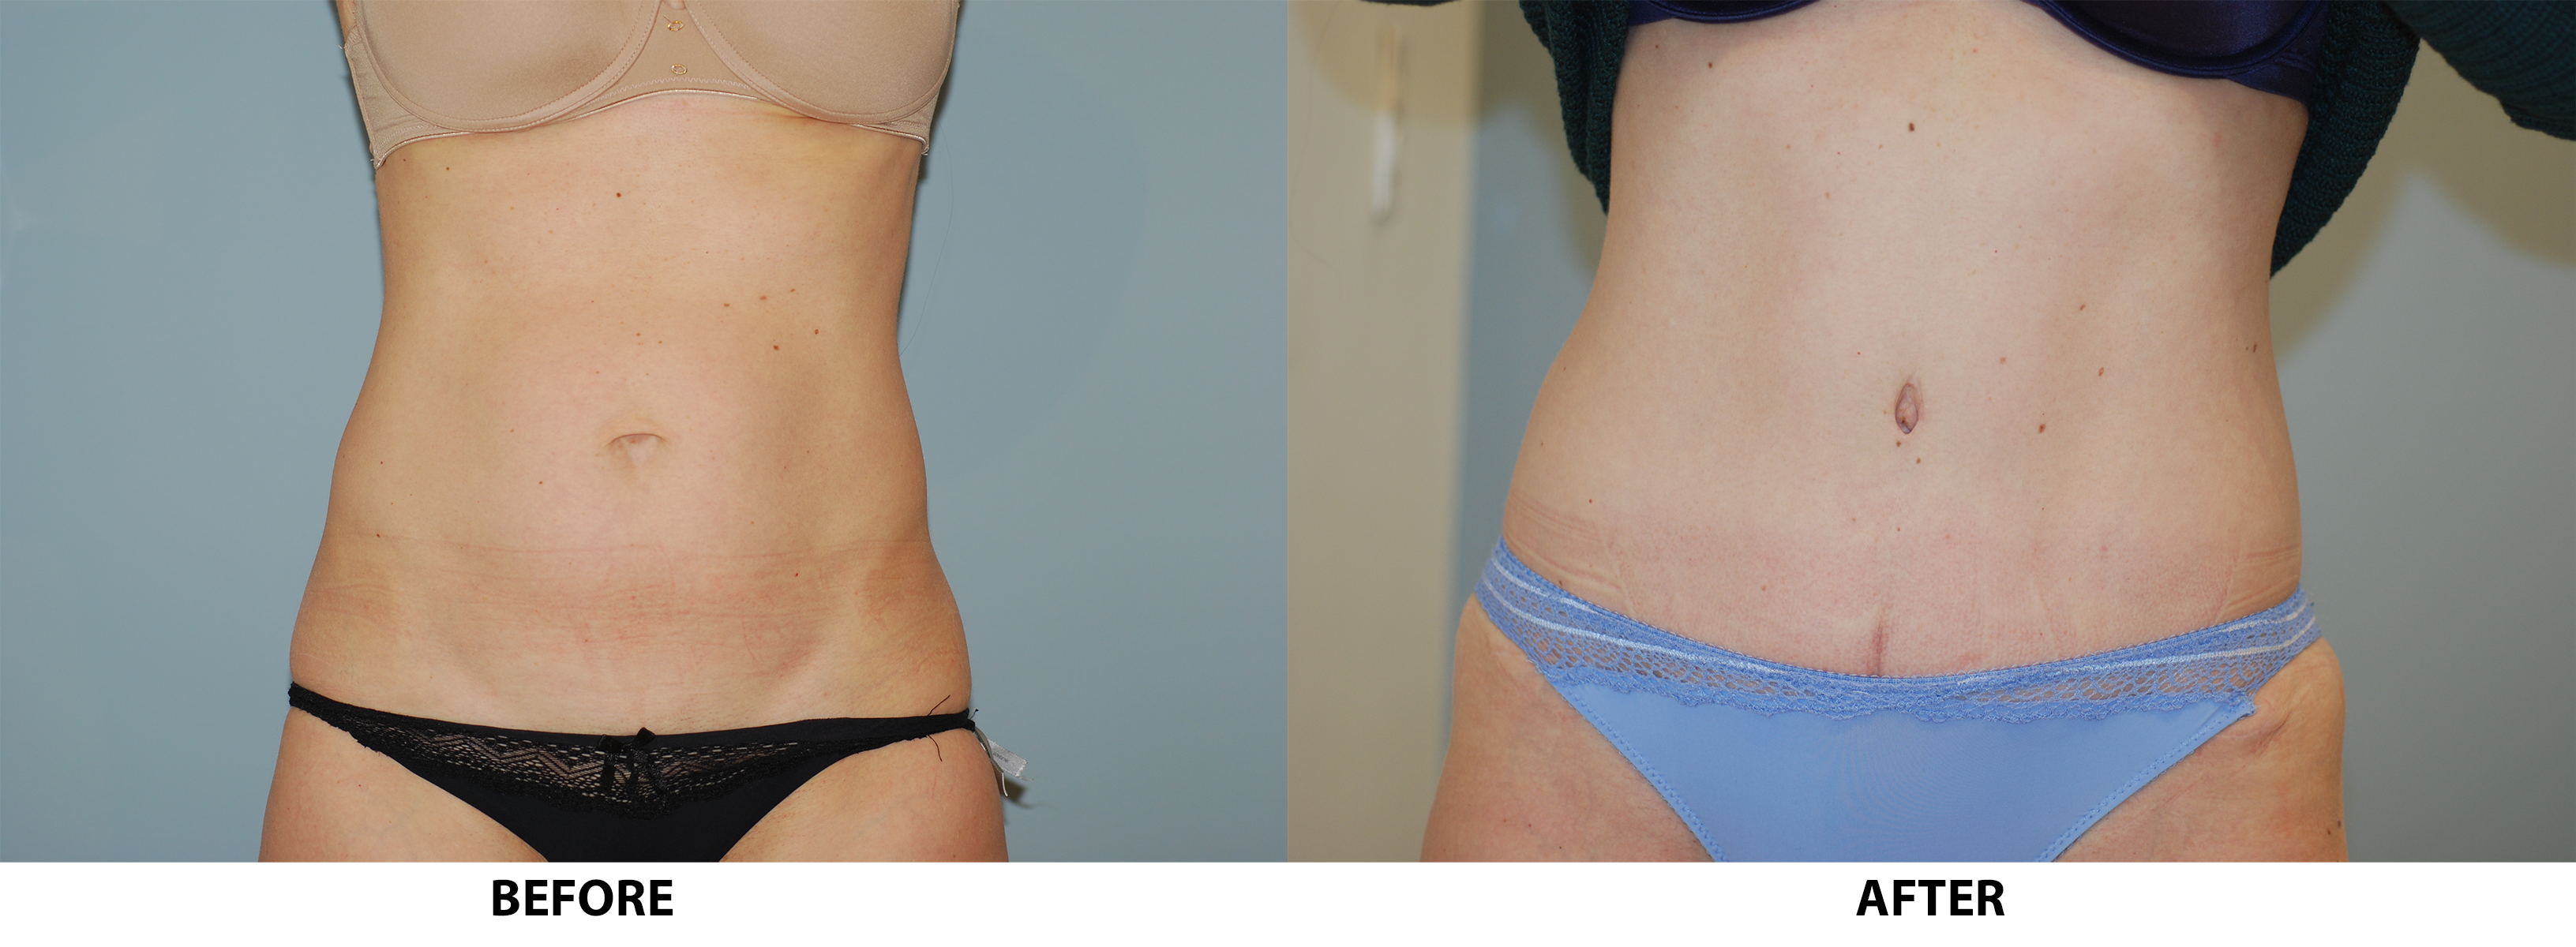 Before & After Pictures of Tummy Tuck  Tummy Tuck Specialist Specialist  Brooklyn - Tummy Tuck Specialist Specialist Farragut - Tummy Tuck  Specialist Specialist Canarsie - Tummy Tuck Specialist Specialist Brooklyn  Heights 